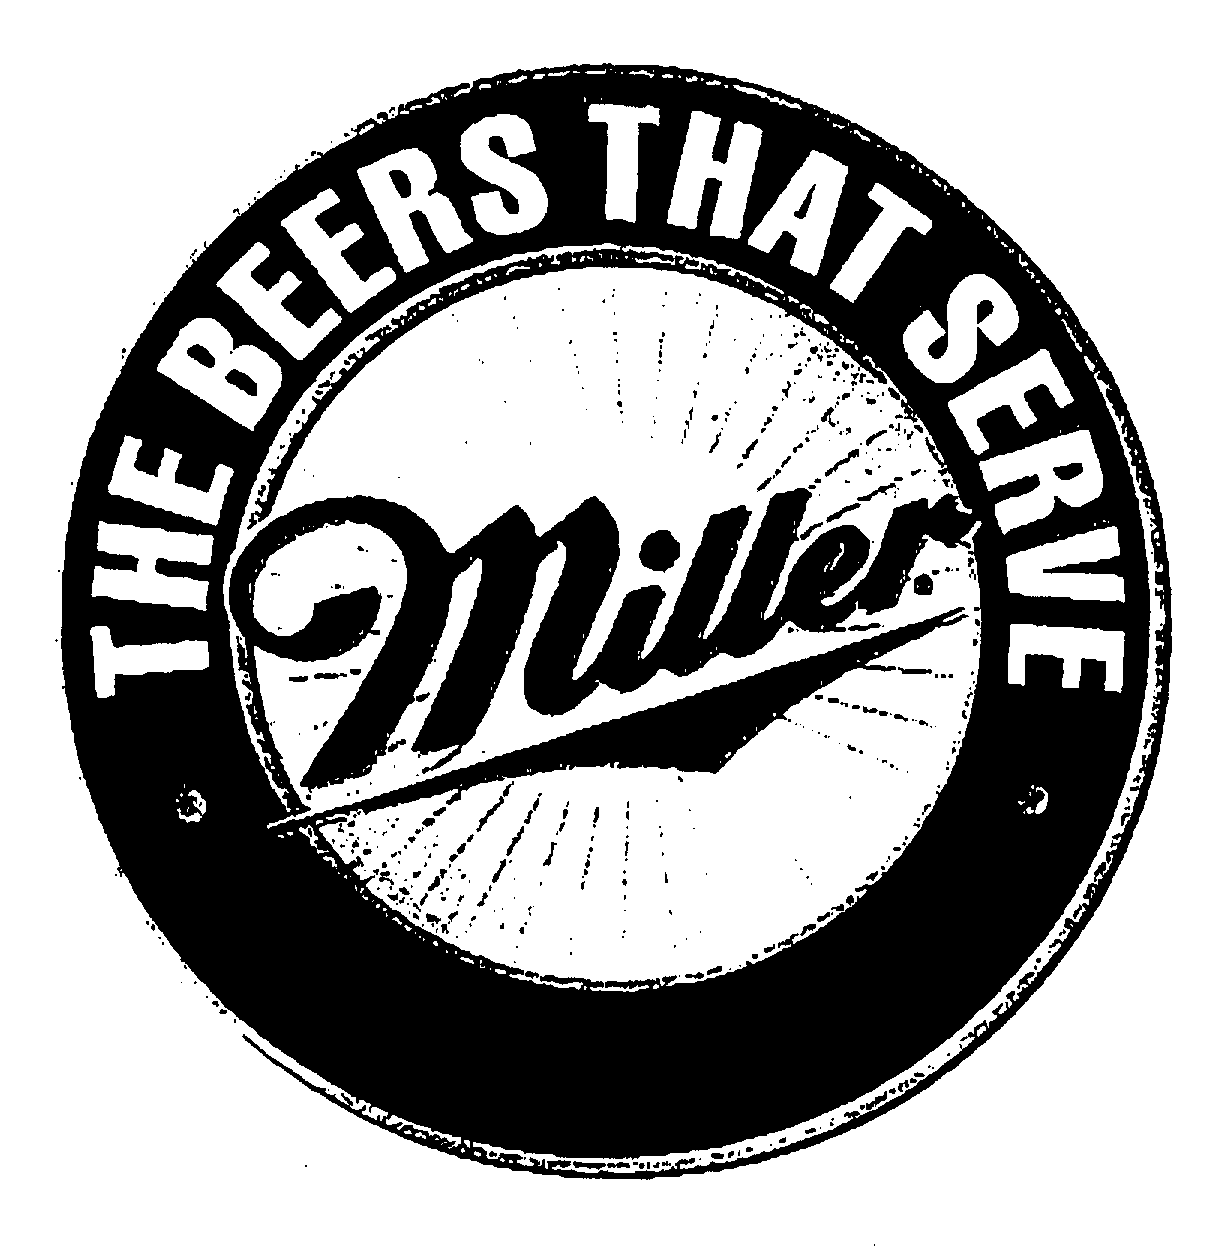  MILLER THE BEERS THAT SERVE